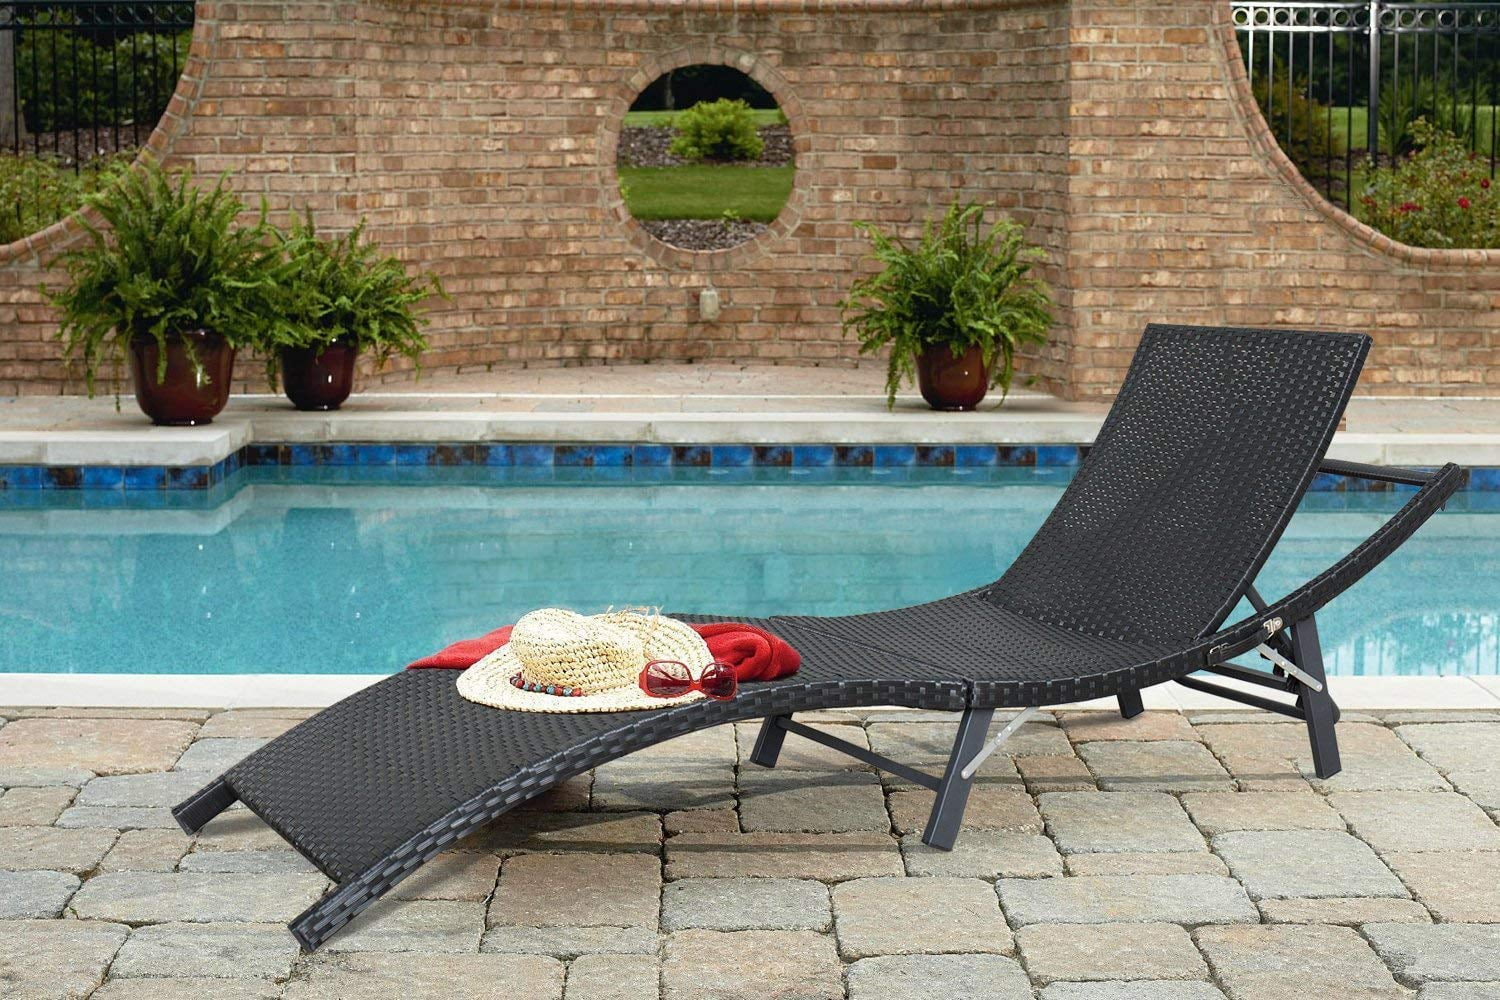 Furnivilla 3 PCS Outdoor Patio Resin Chaise Lounge Chair Set of 2 Patio Reclining Chaise Lounge Beach Chair with Adjustable Recliner and 1 Cool Bar Cooler Side Table for Backyard, Porch or Poolside 